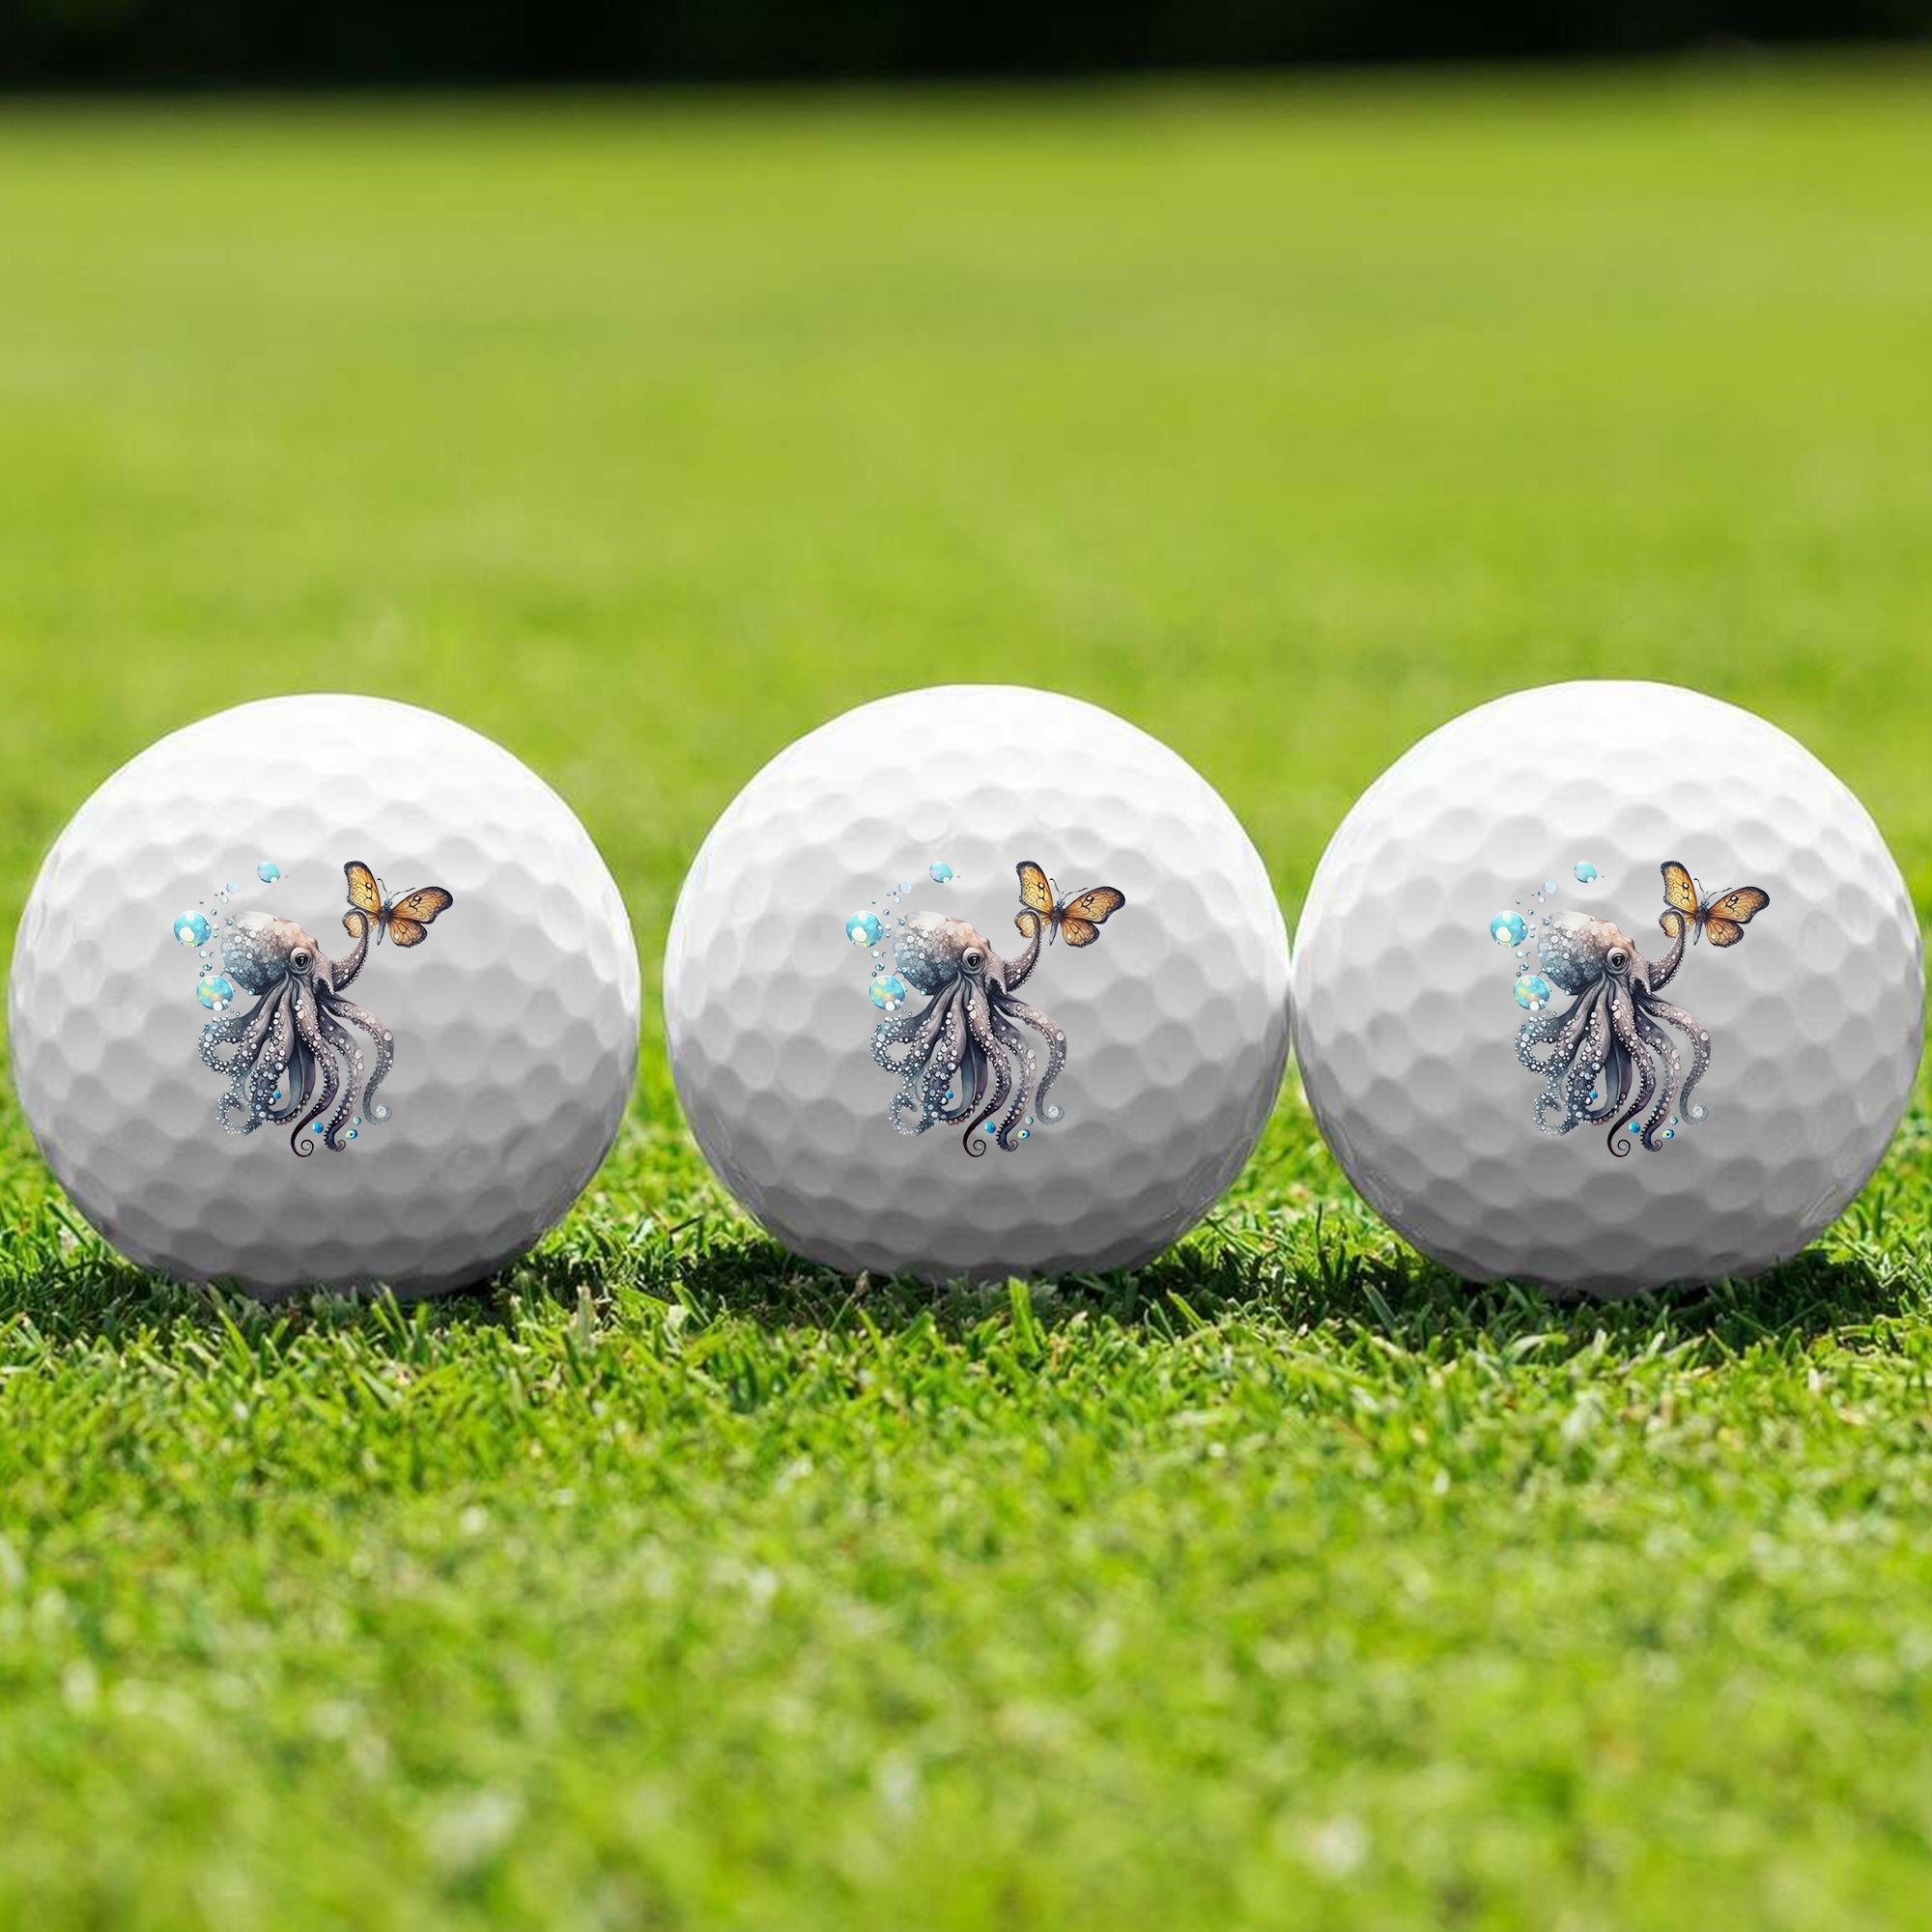 Octopus Playing With Butterfly 03 Golf Ball 3 Pack